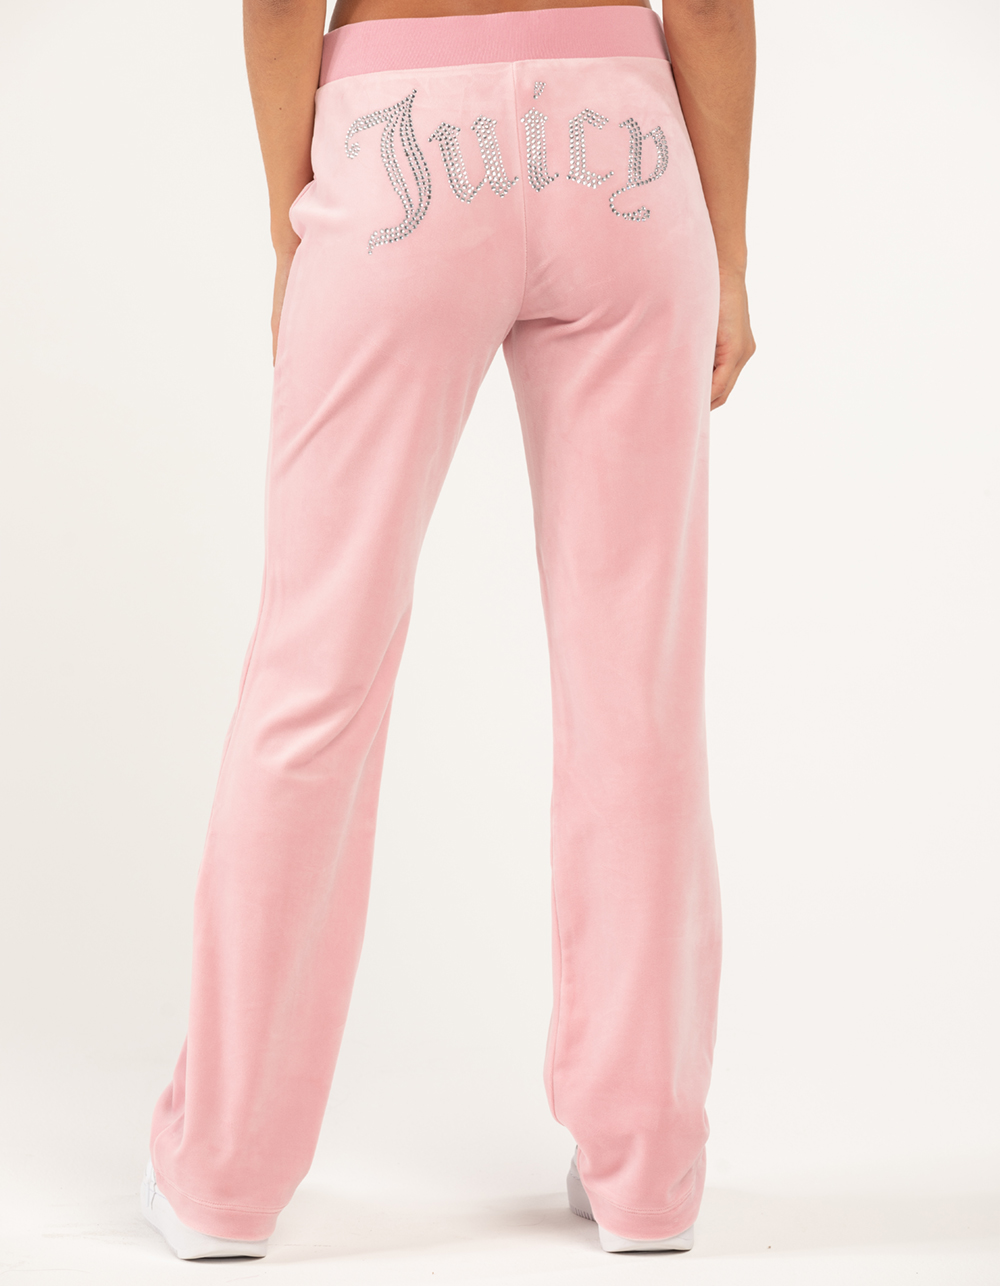 Juicy Couture Sport Leggings - $13 New With Tags - From Maria